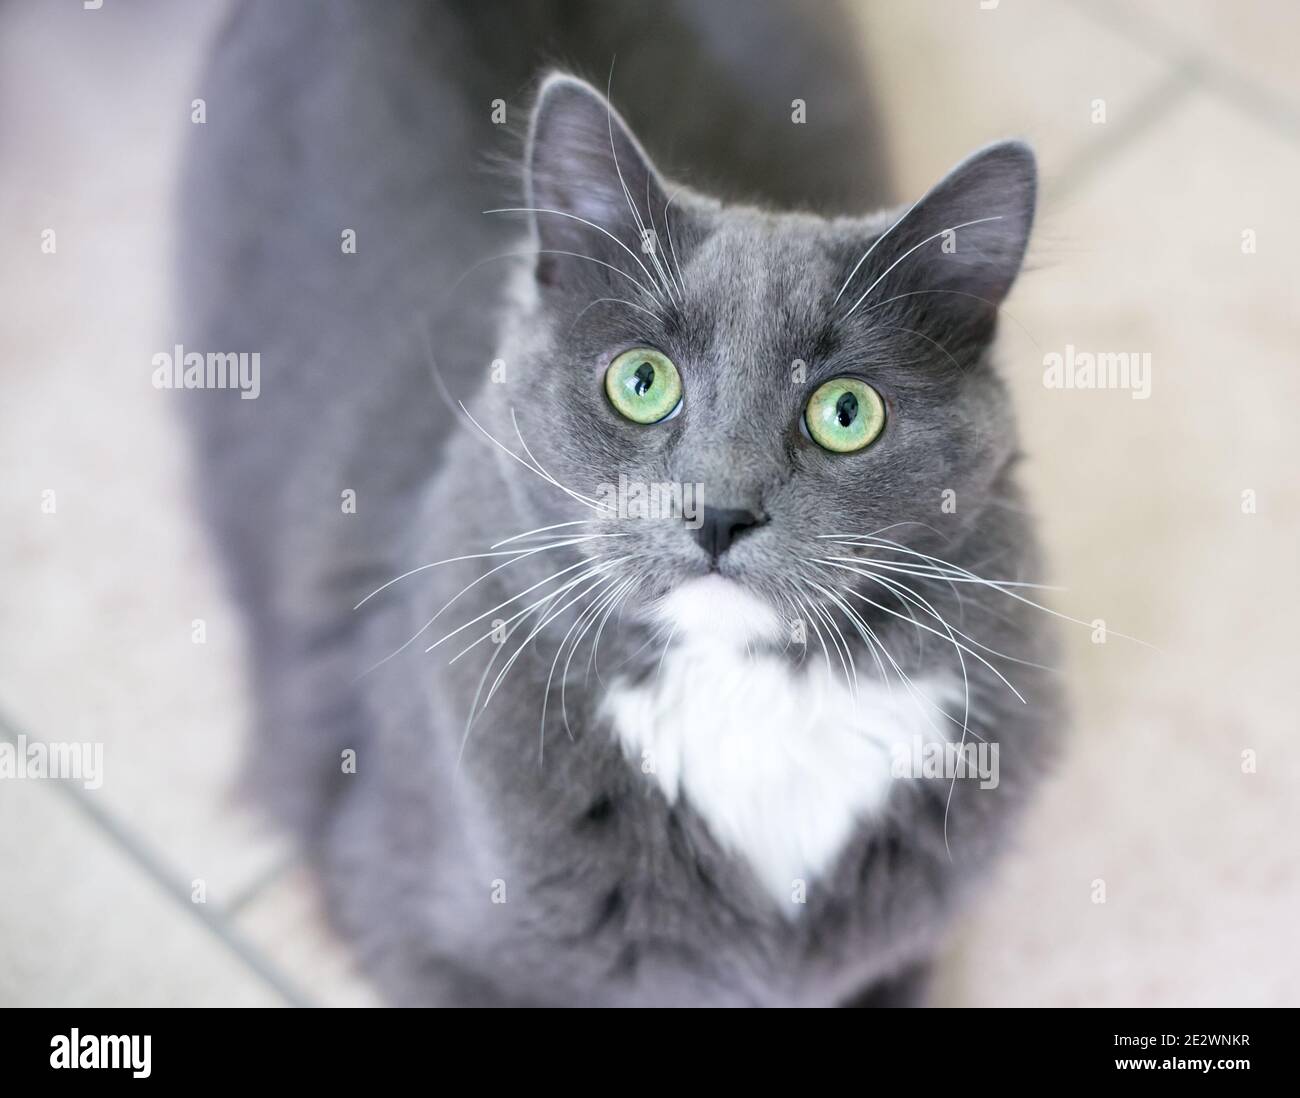 A gray and white domestic medium haired cat with green eyes looking up at the camera Stock Photo